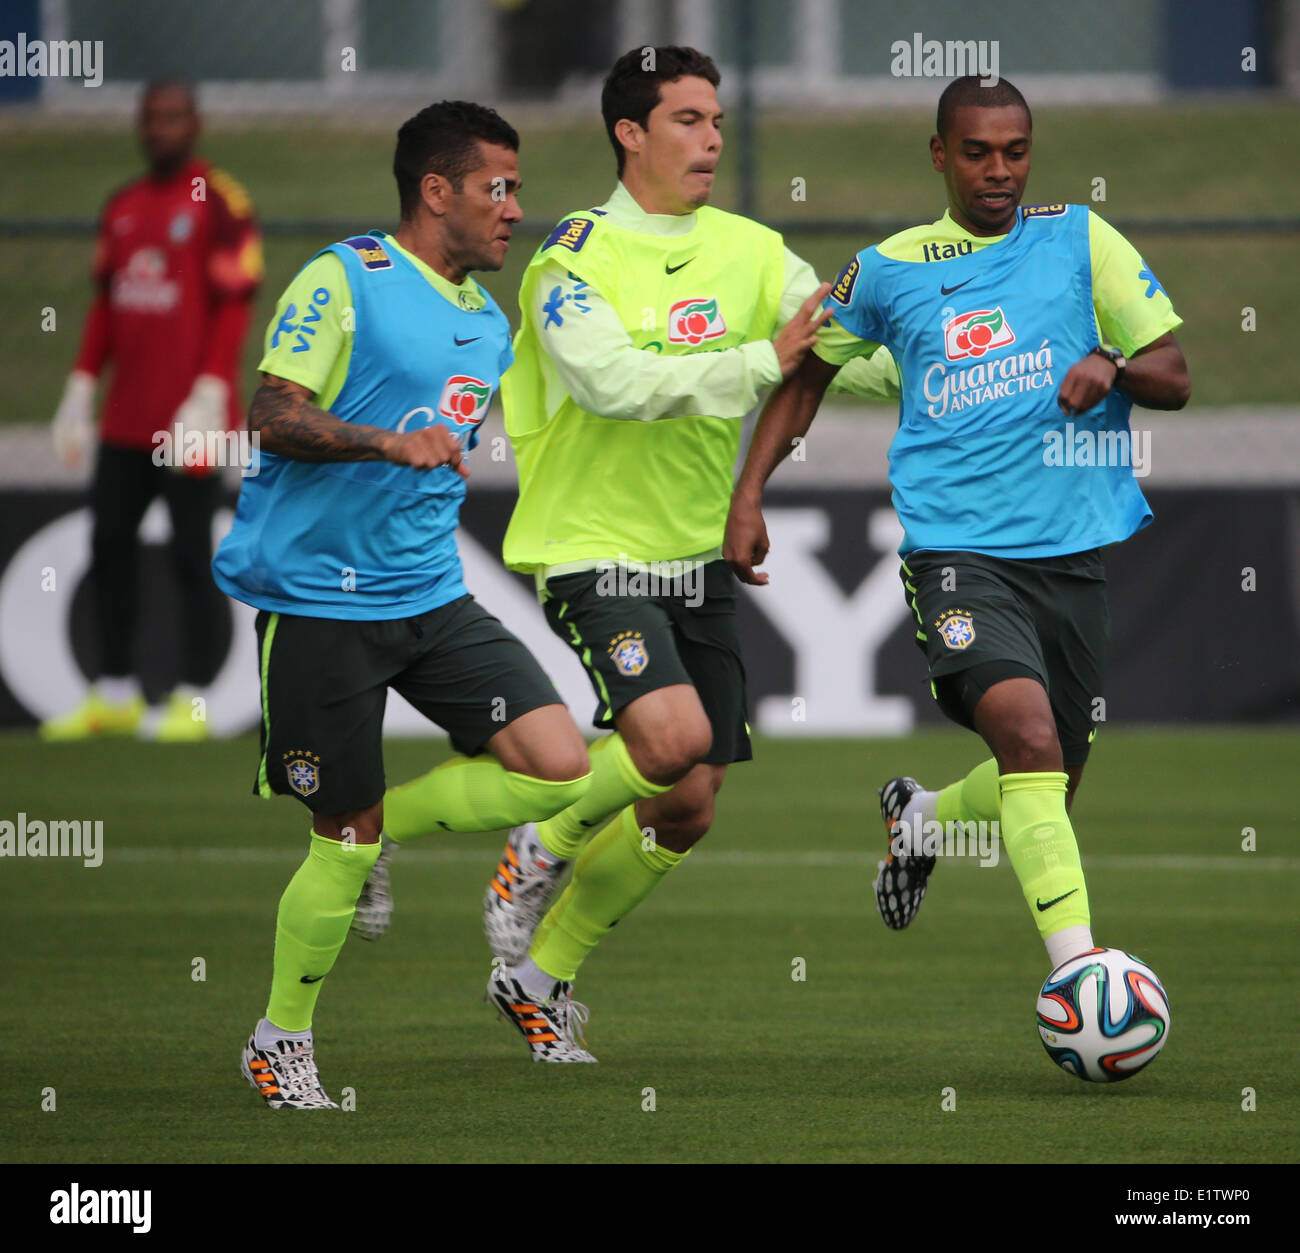 Teresopolis, Rio de Janeiro, Brazil. 9th June, 2014. Daniel Alves, Hernanes e Fernandinho during a training session of the Brazilian national football team at the Granja Comary training center in Teresopolis, Rio de Janeiro, Brazil, on June 9, 2014. Brazilian team prepares for the 2014 Fifa World Cup. Credit:  dpa picture alliance/Alamy Live News Stock Photo